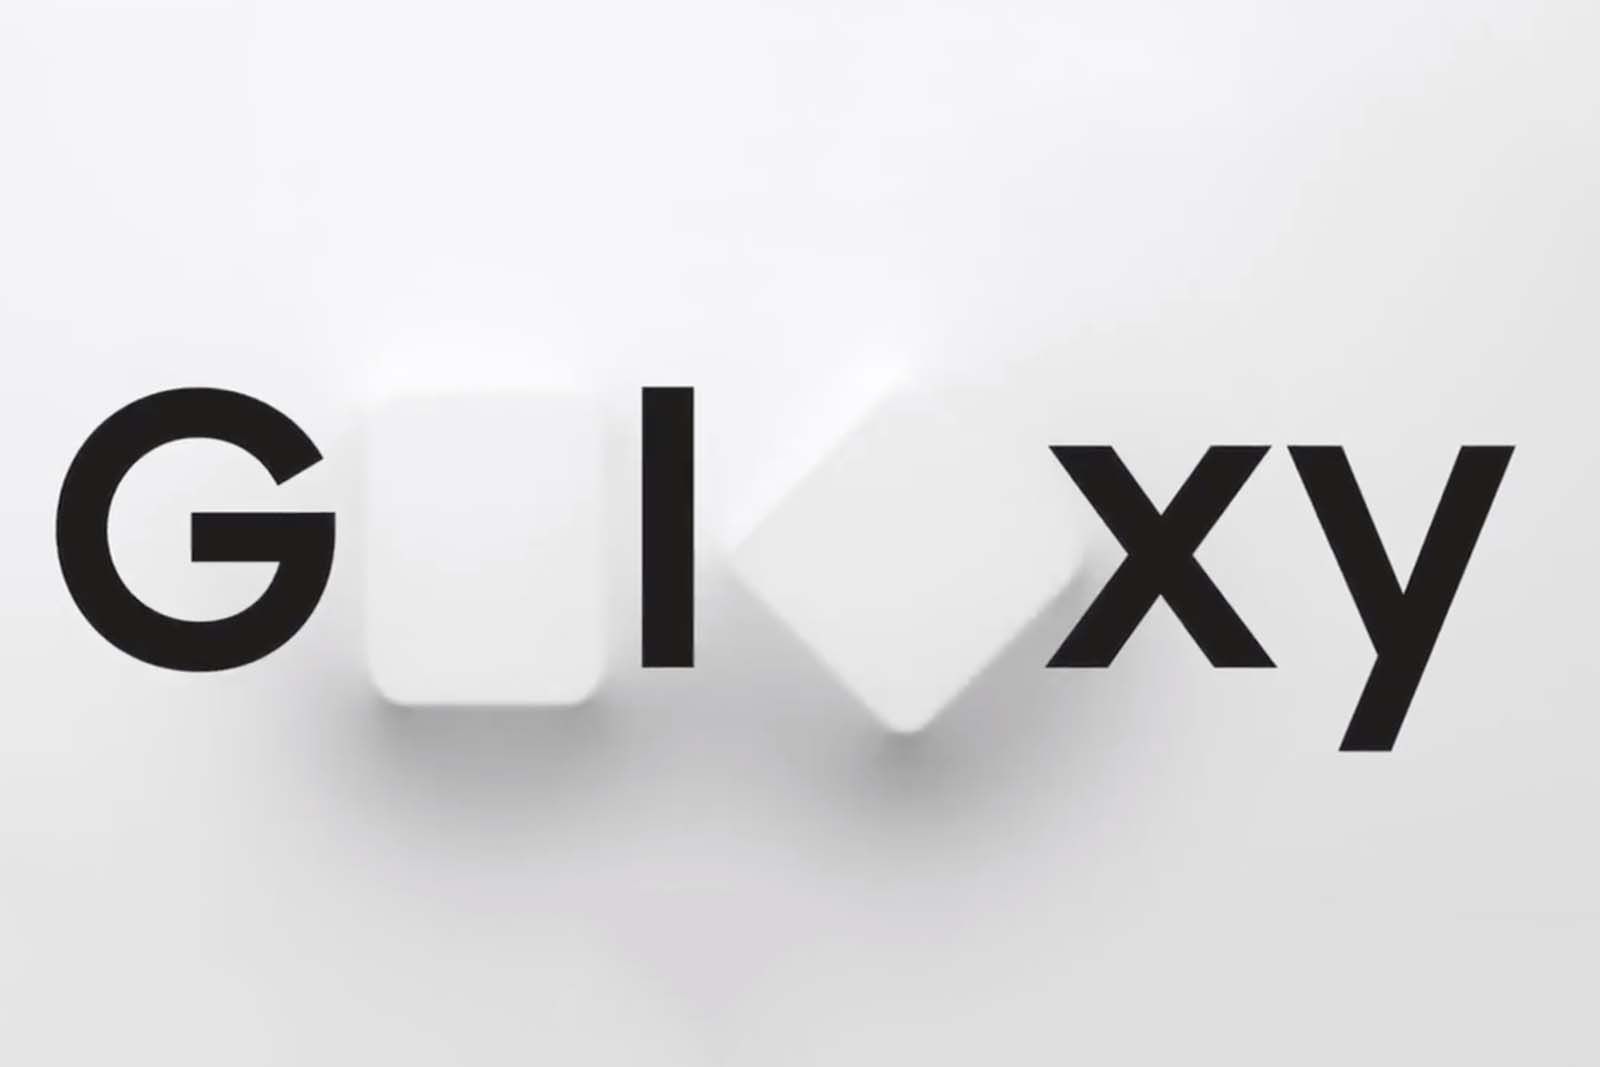 More confirmations roll in that Samsungs next flagship phone will be called the Galaxy S20 image 1